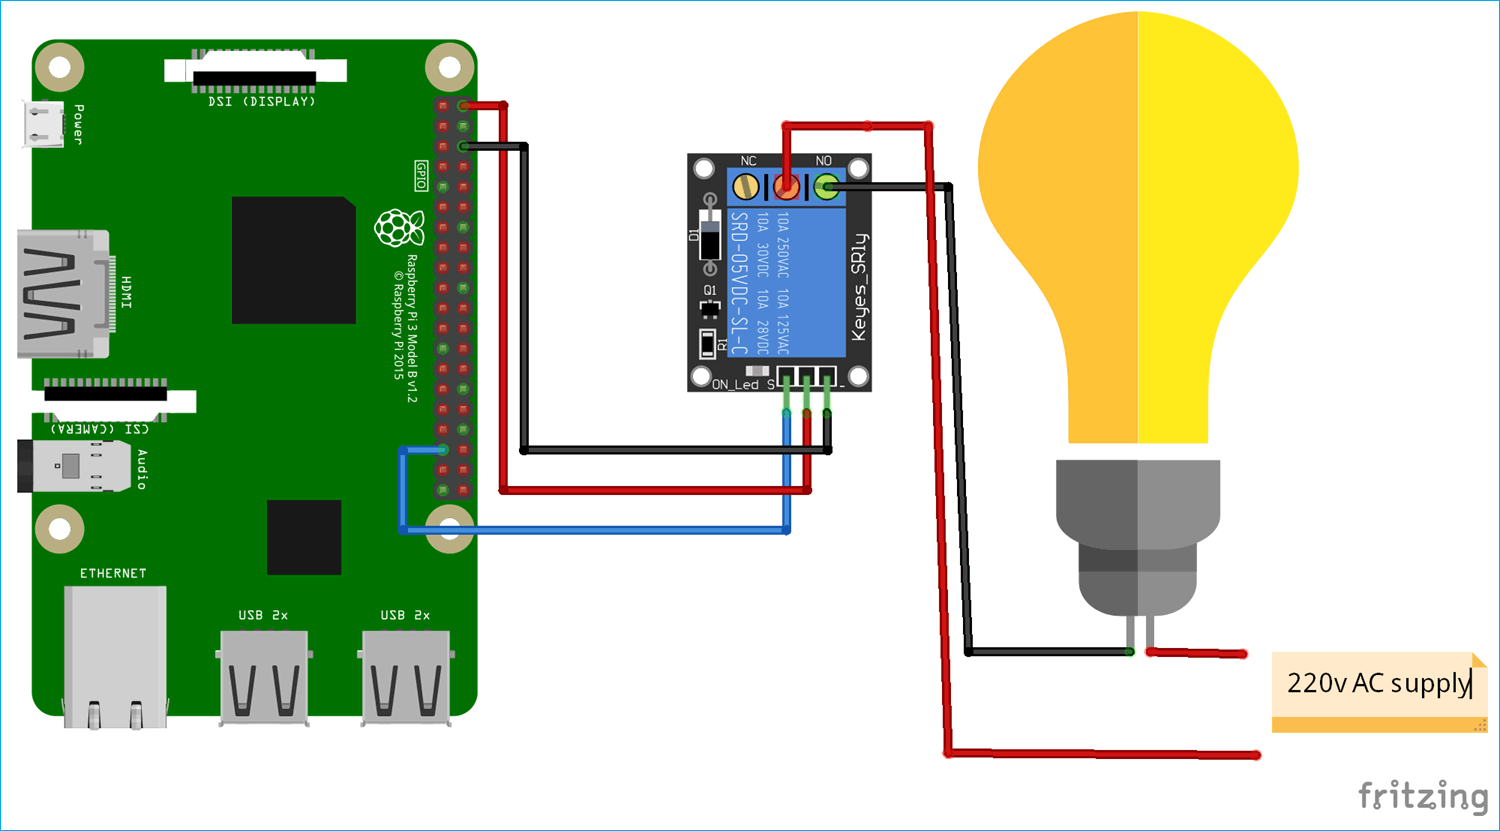 Circuit Diagram for MQTT based Raspberry Pi Home Automation